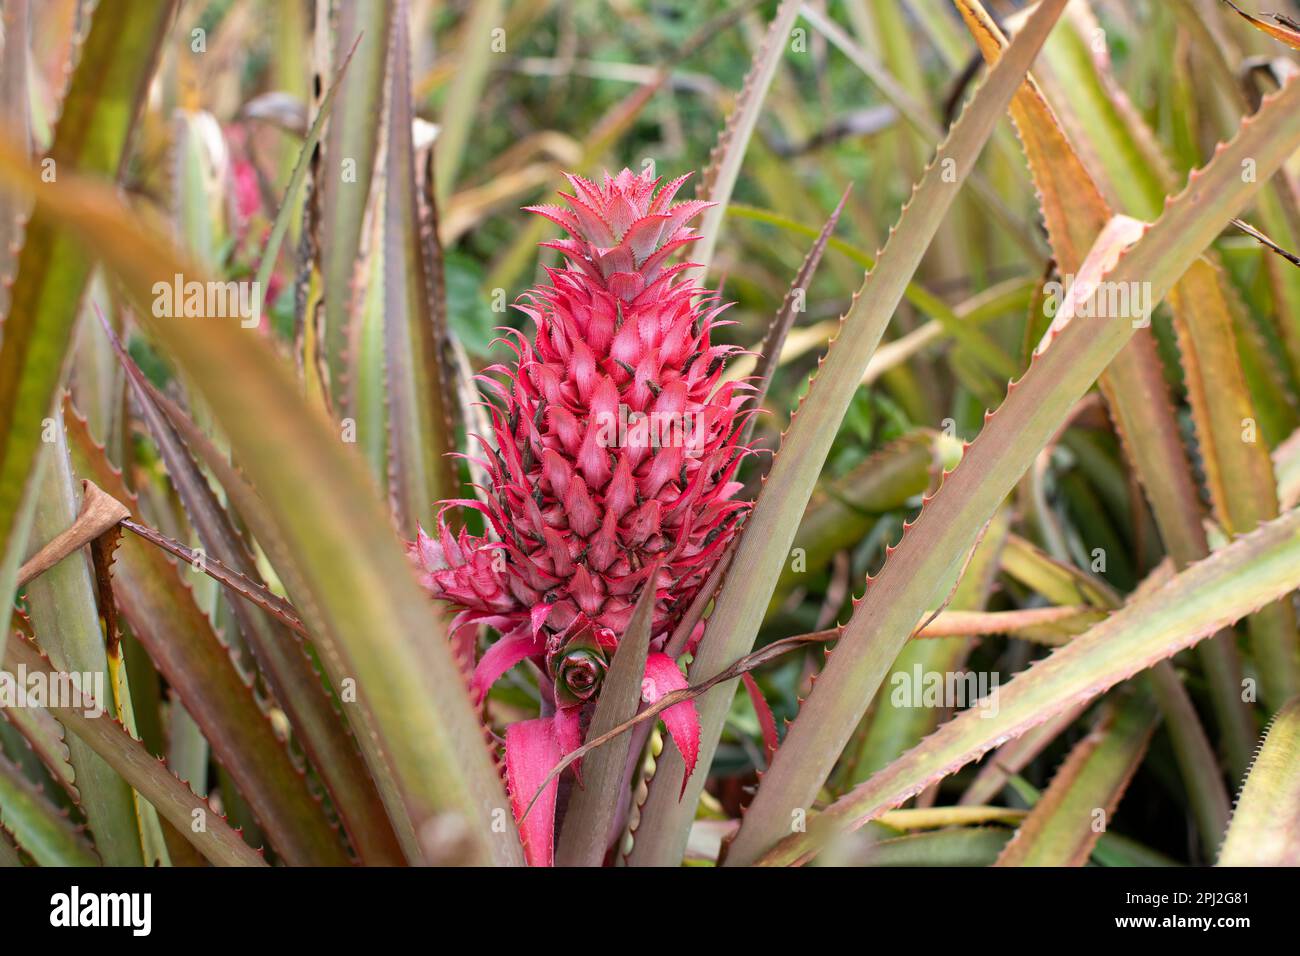 Ornamental pink pineapple plant. Close-up Pineapple flower Aechmea fasciata (silver vase, urn plant) blossom with green leaves nature background Stock Photo